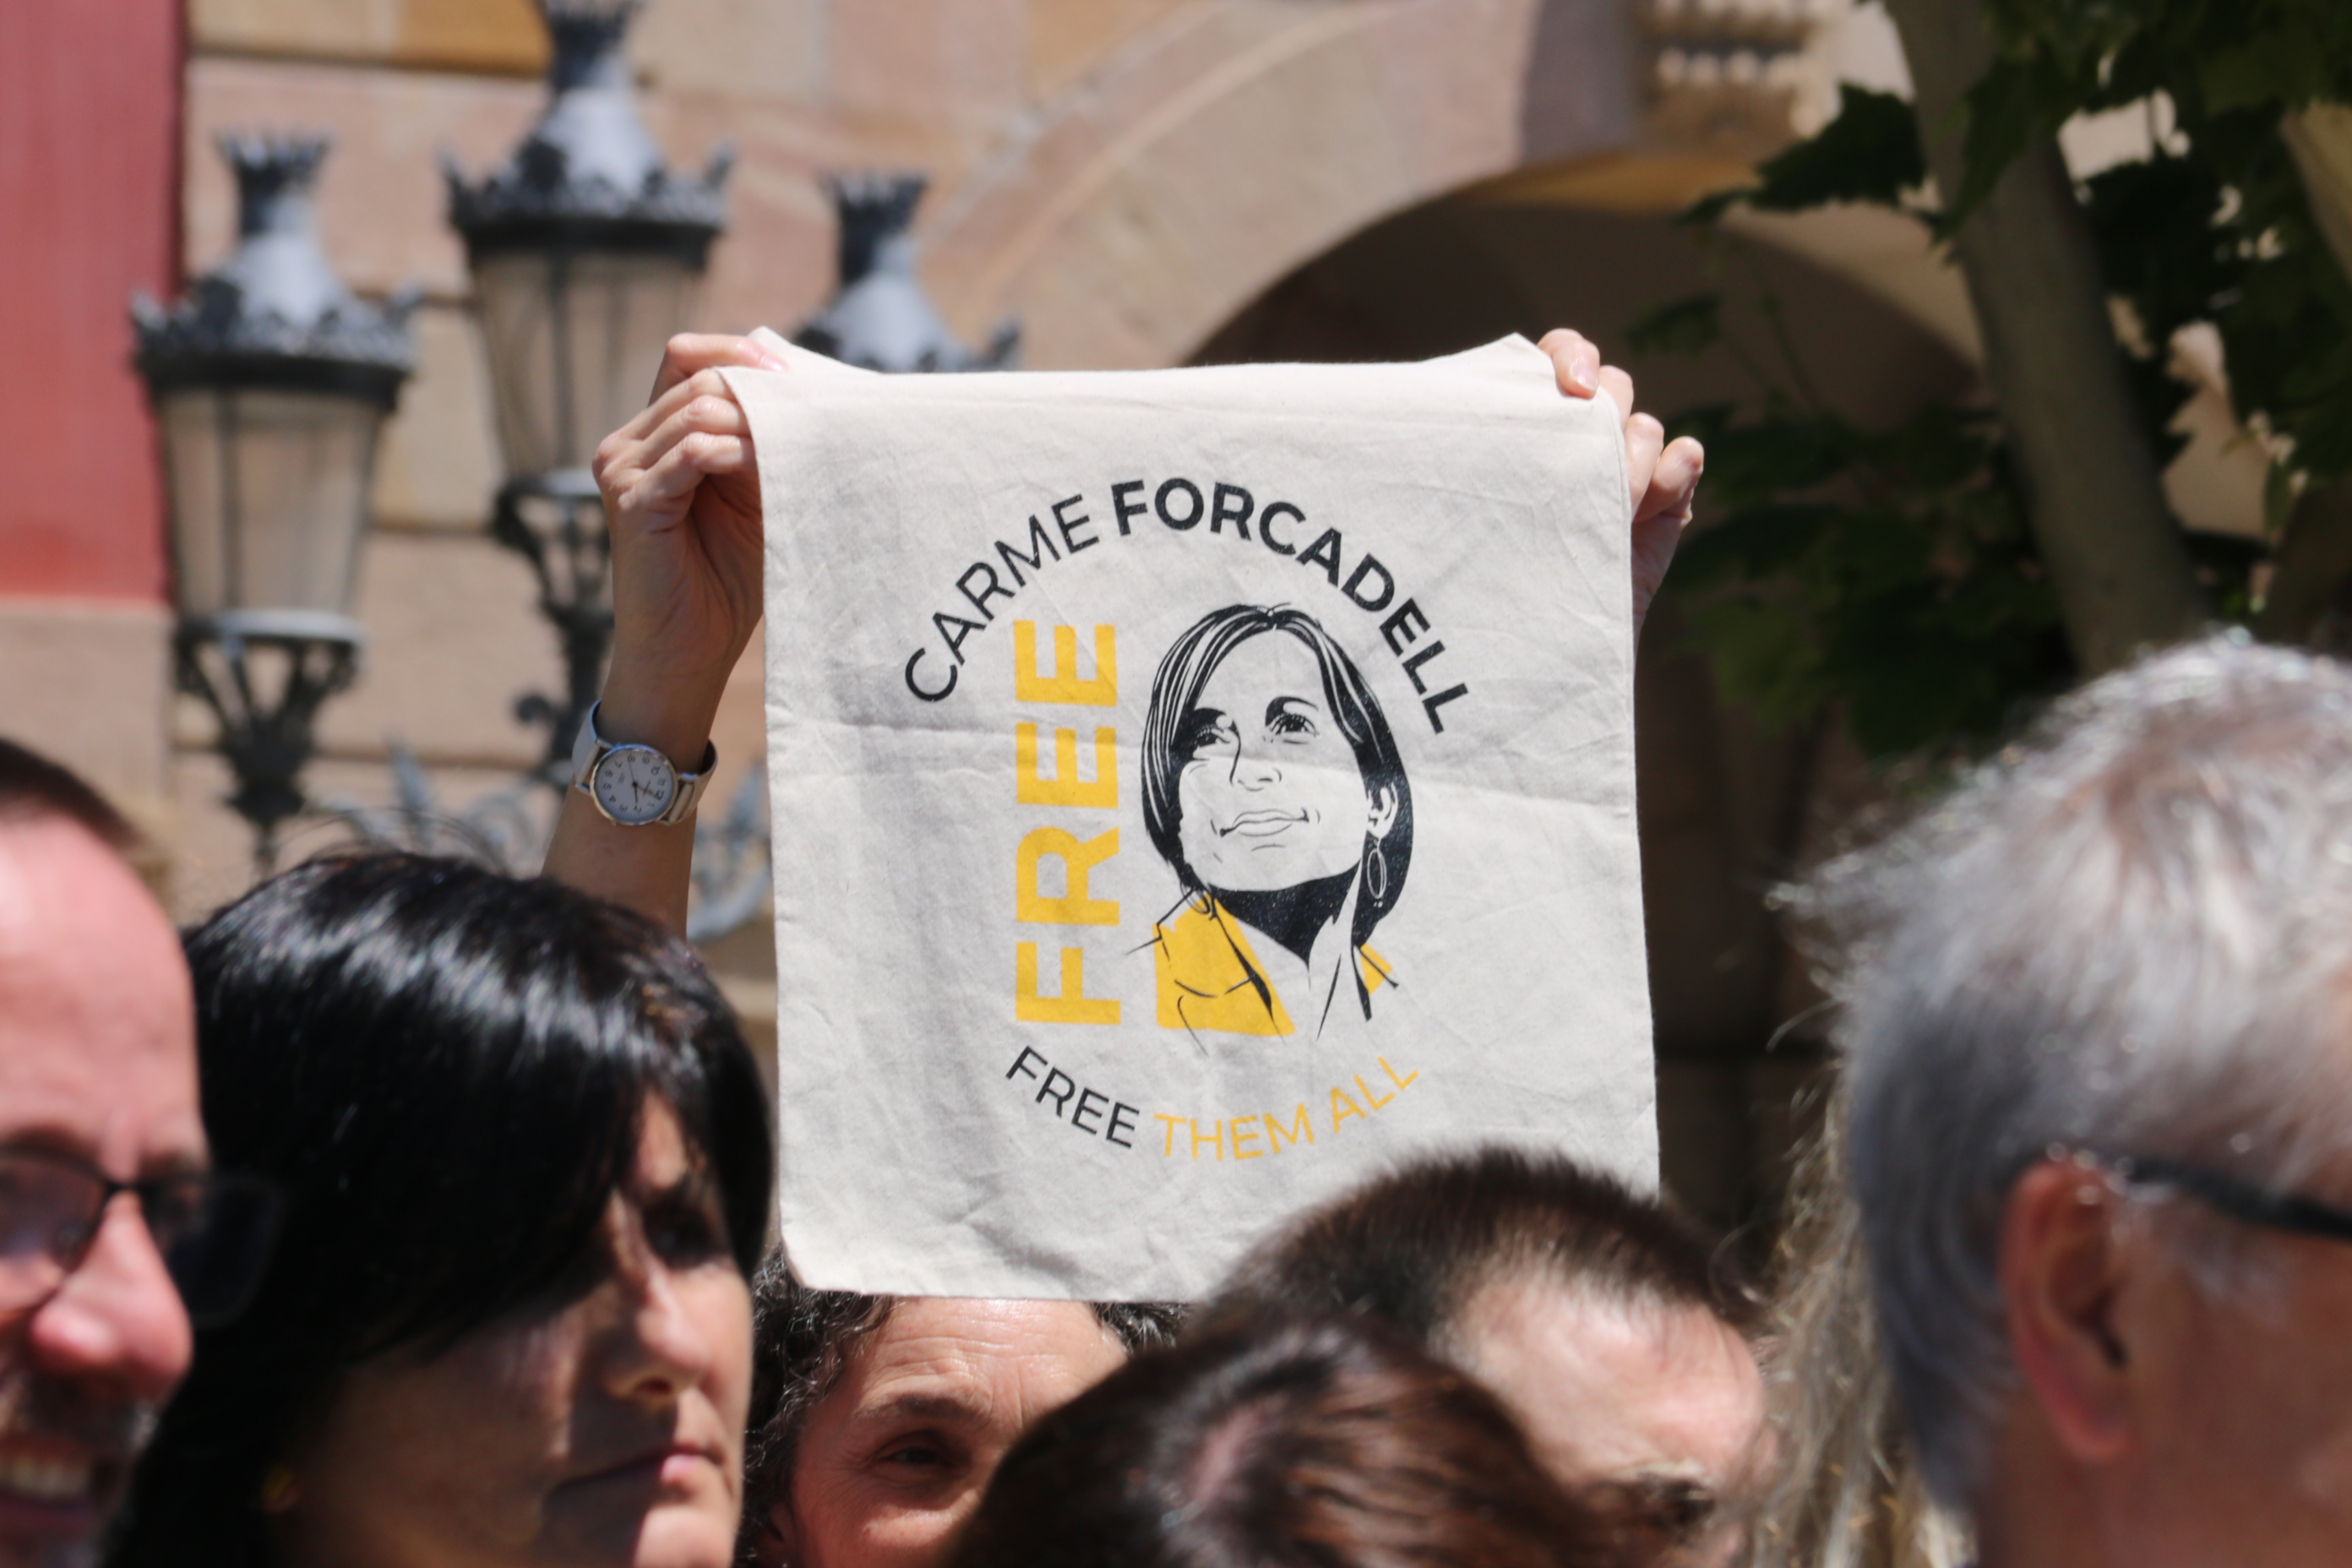 A Parliament worker holds up a bandana asking for former Speaker Forcadell to be released from prison (Bernat Vilaró/ACN)